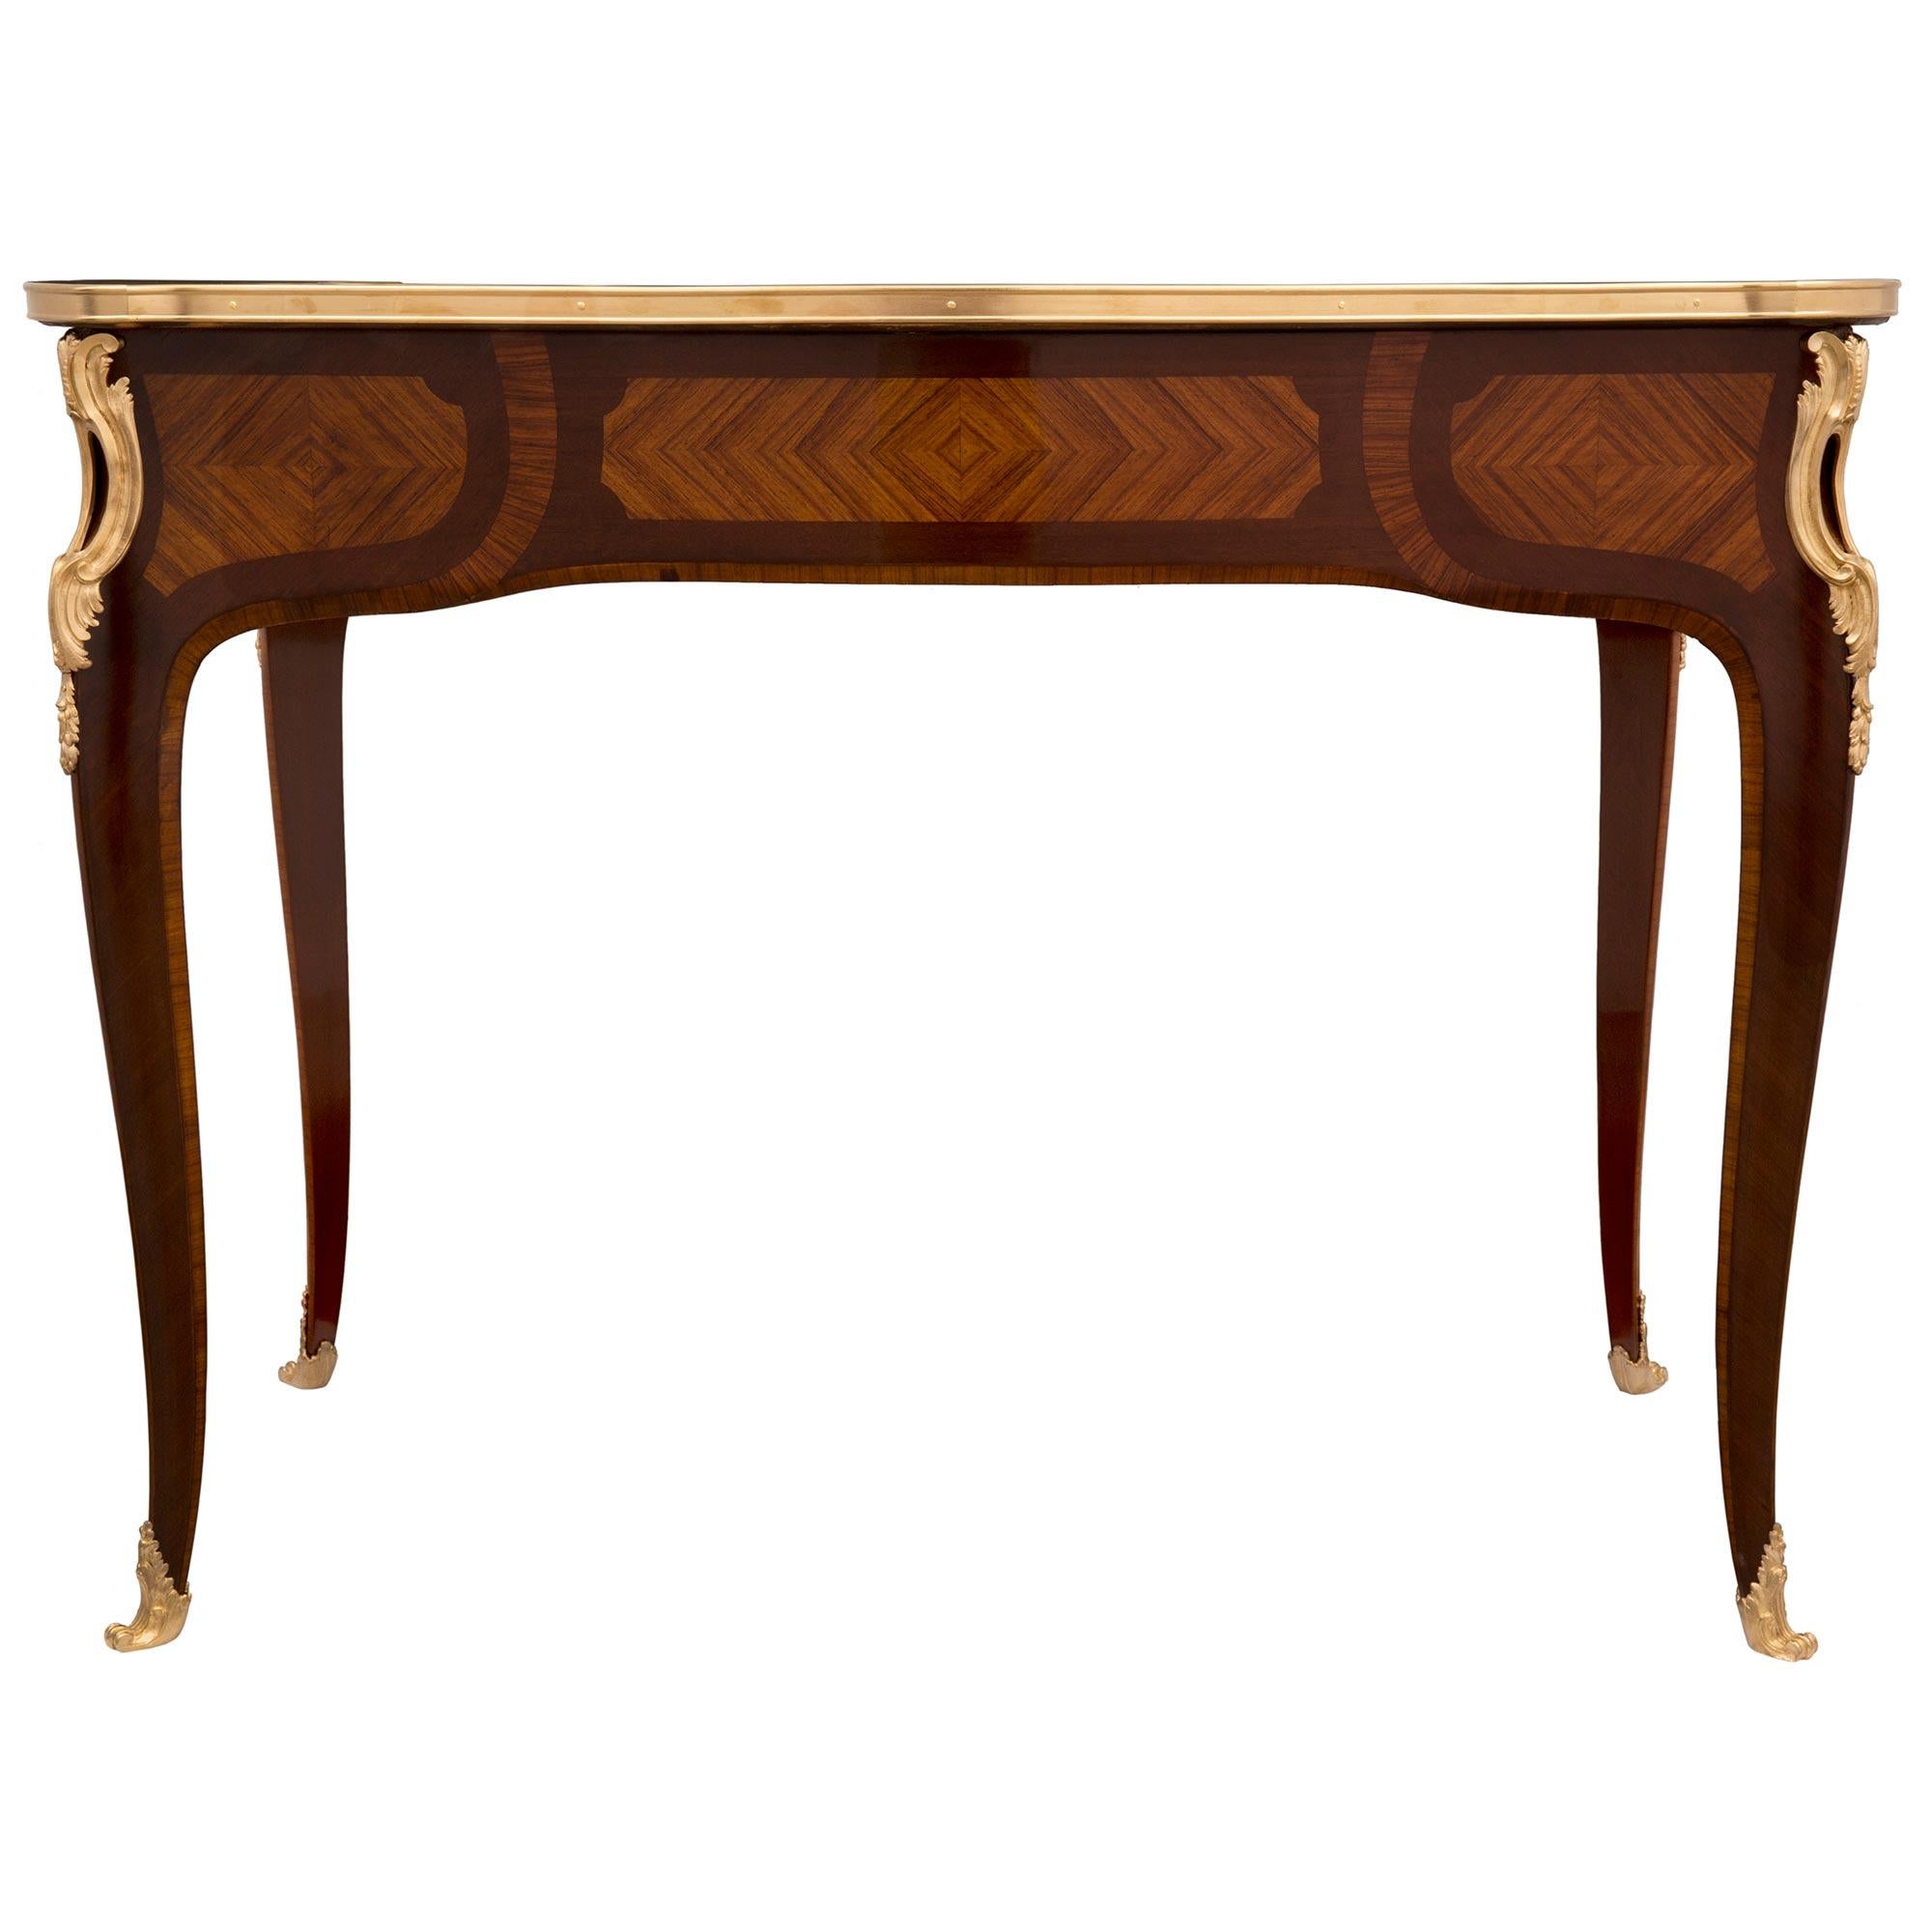 French 19th Century Louis XV St. Kingwood, Tulipwood and Ormolu Desk For Sale 3